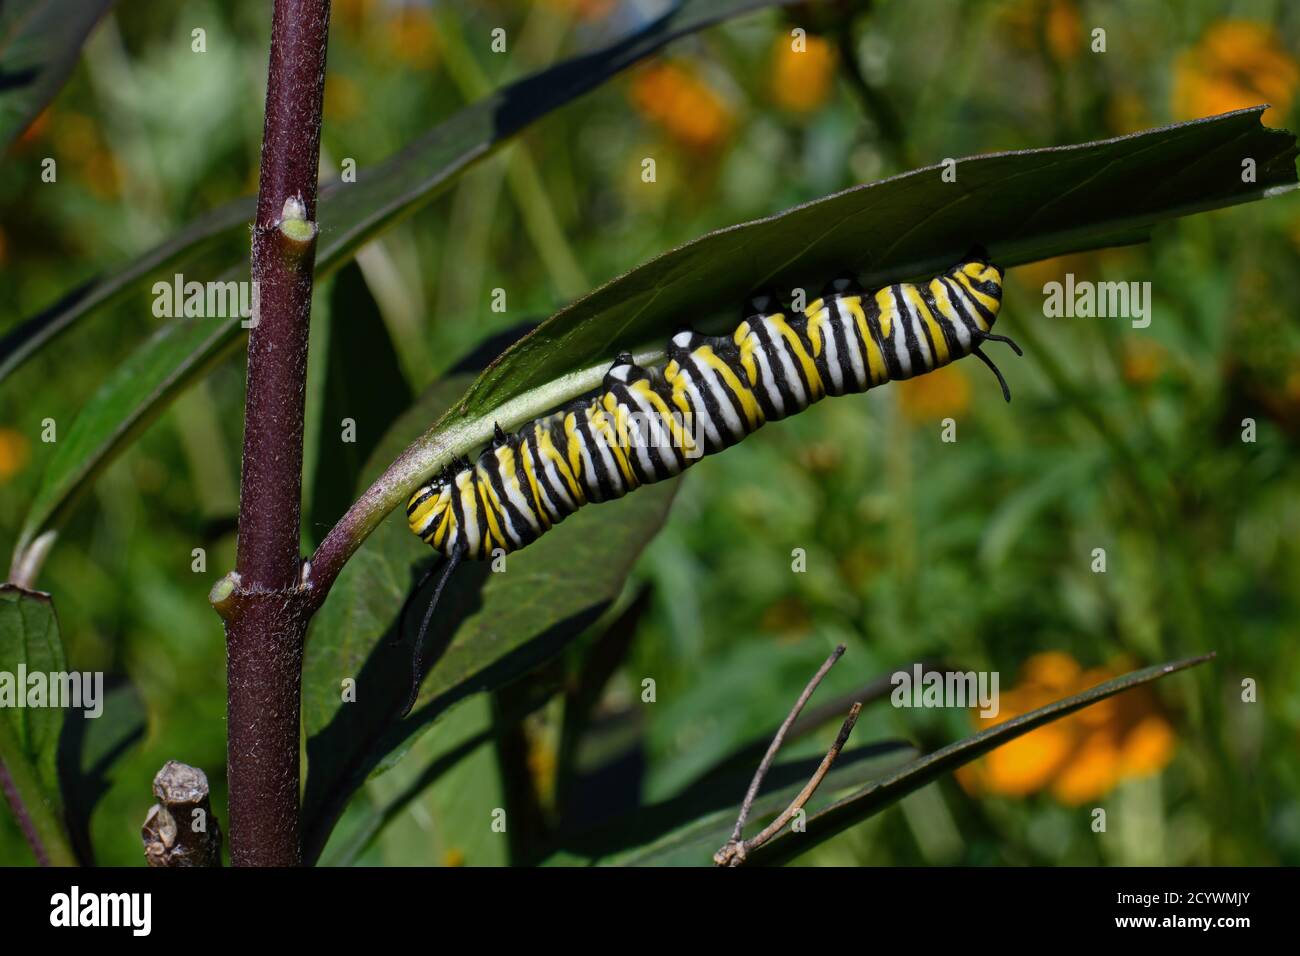 Monarch butterfly caterpillar on milkweed leaf. It is a milkweed butterfly in the family Nymphalidae and is threatened by habitat loss in the USA. Stock Photo